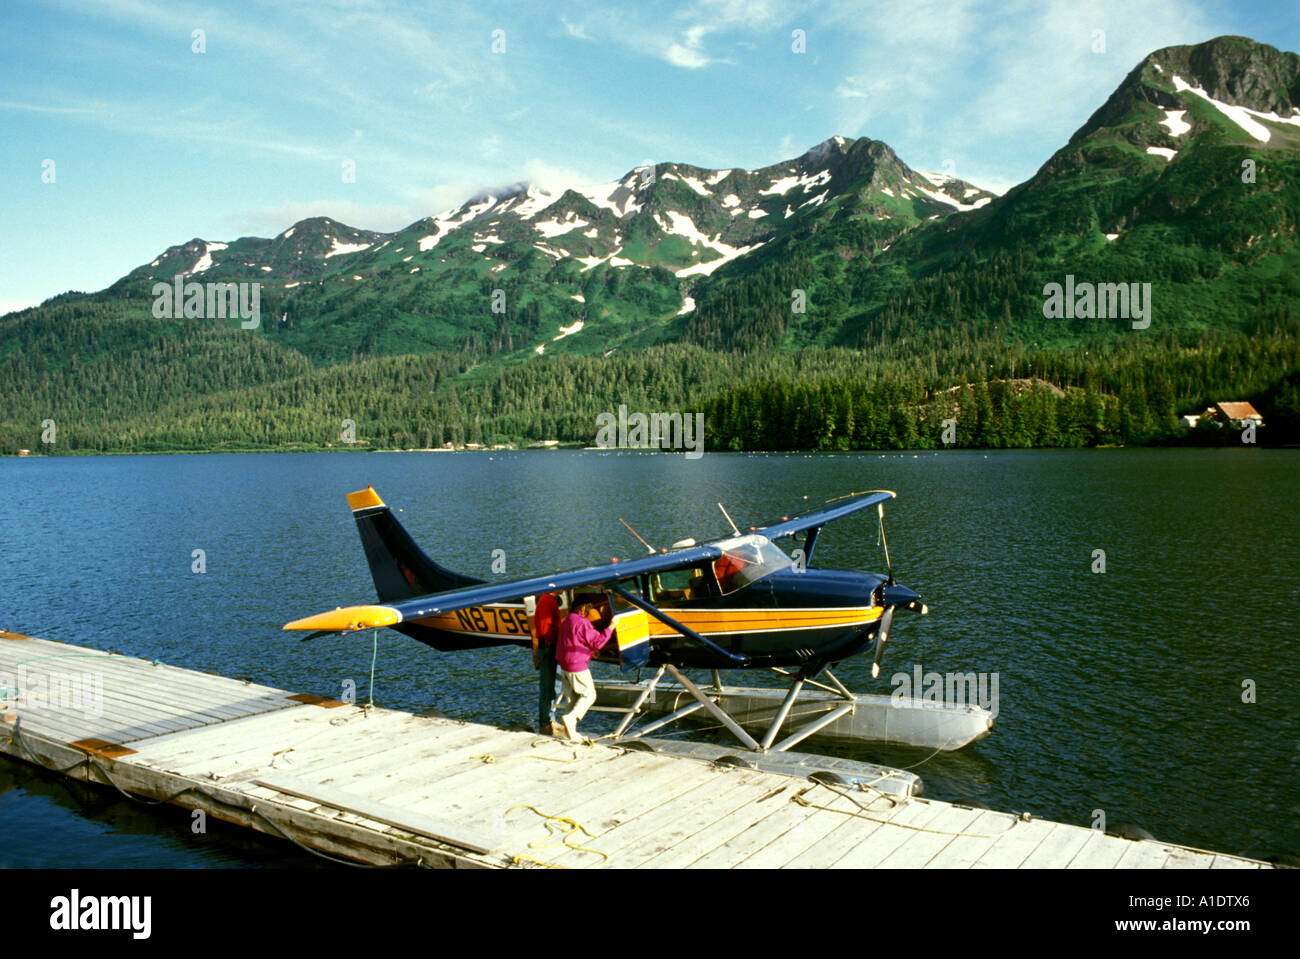 Alaska Exploring Prince William Sound Fly in by small plane Stock Photo